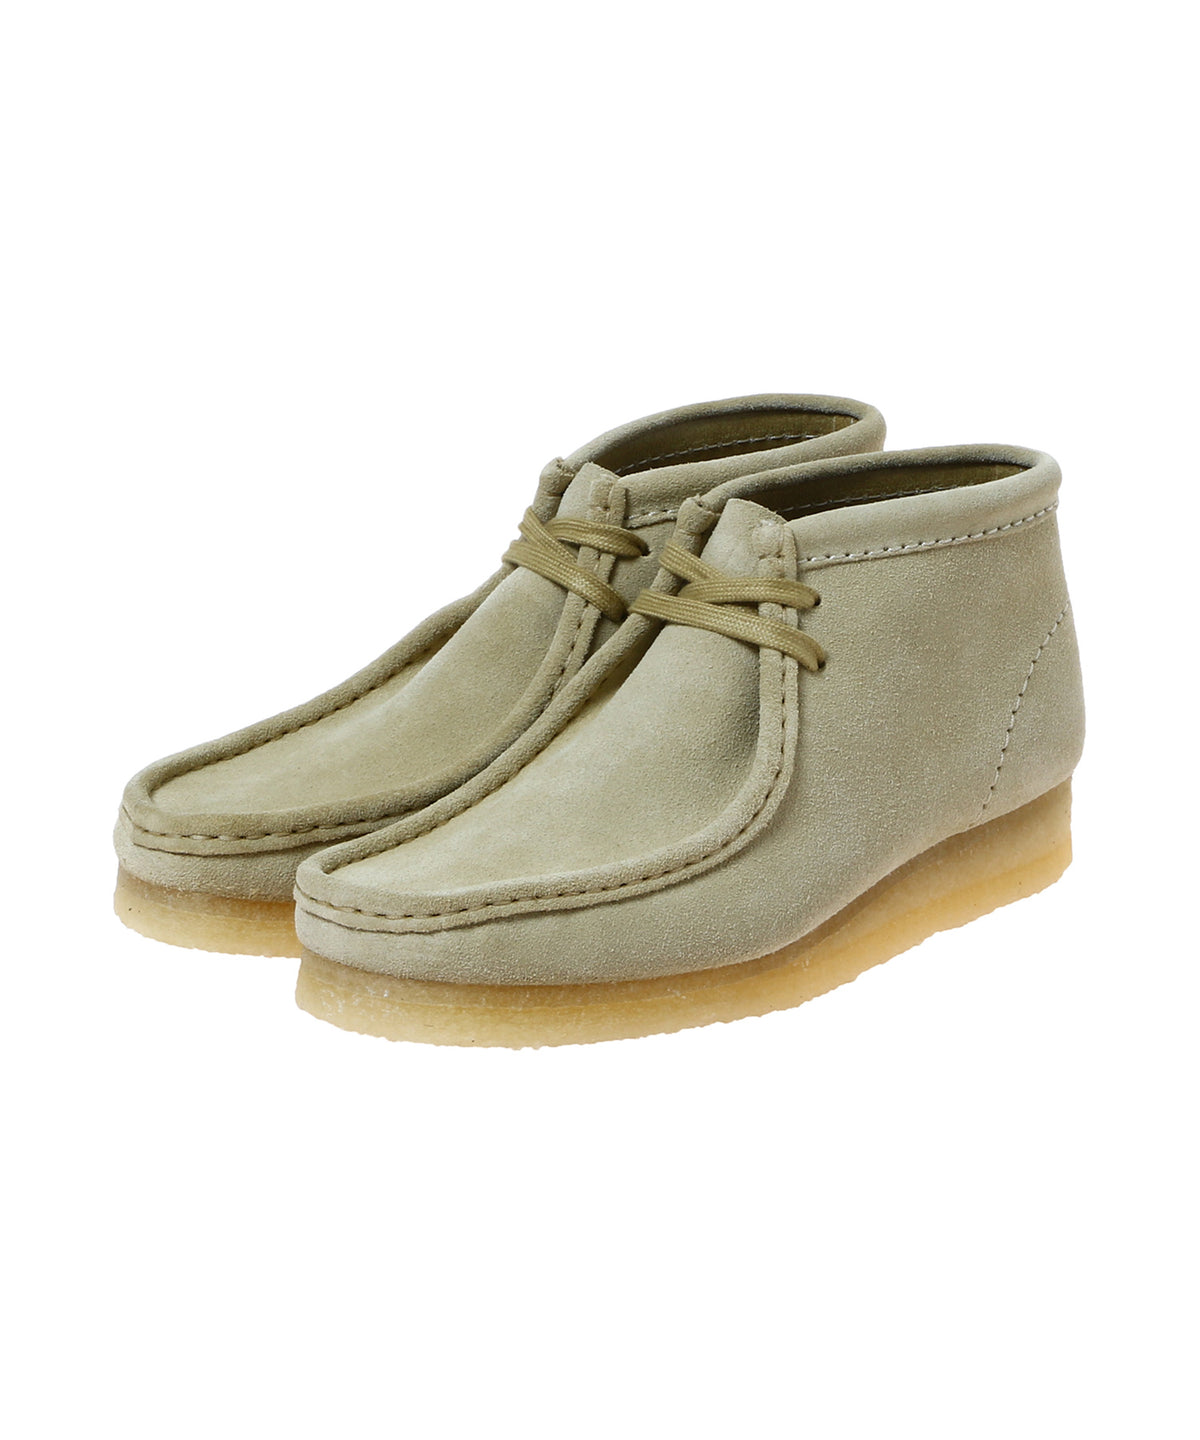 Wallabee Boot. Maple Suede